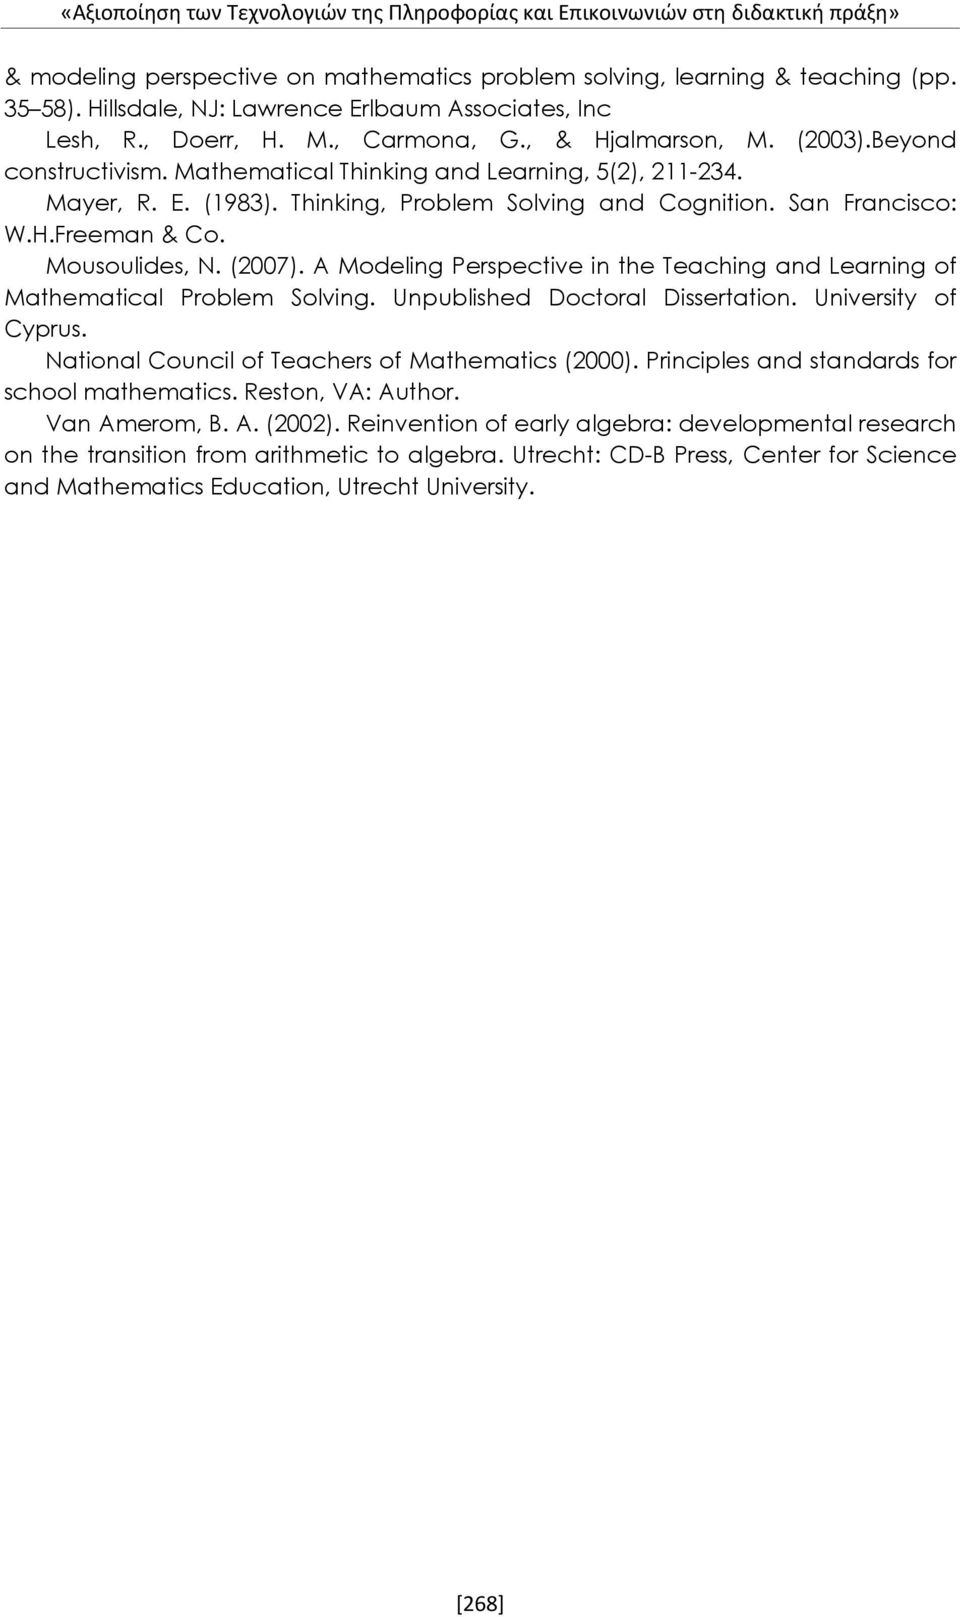 A Modeling Perspective in the Teaching and Learning of Mathematical Problem Solving. Unpublished Doctoral Dissertation. University of Cyprus. National Council of Teachers of Mathematics (2000).